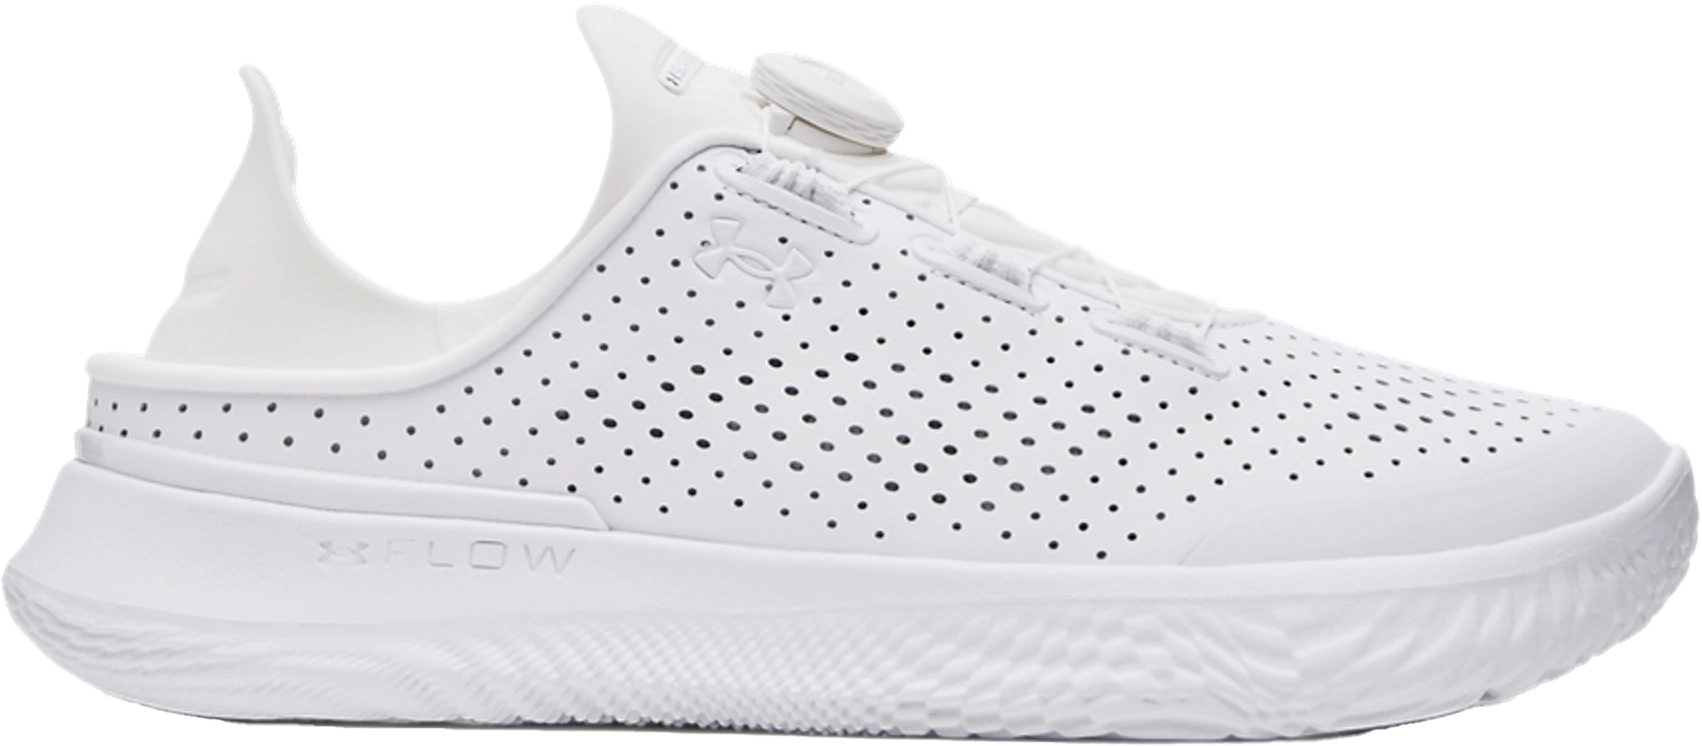 Fitness topánky Under Armour UA Slipspeed Trainer SYN-WHT